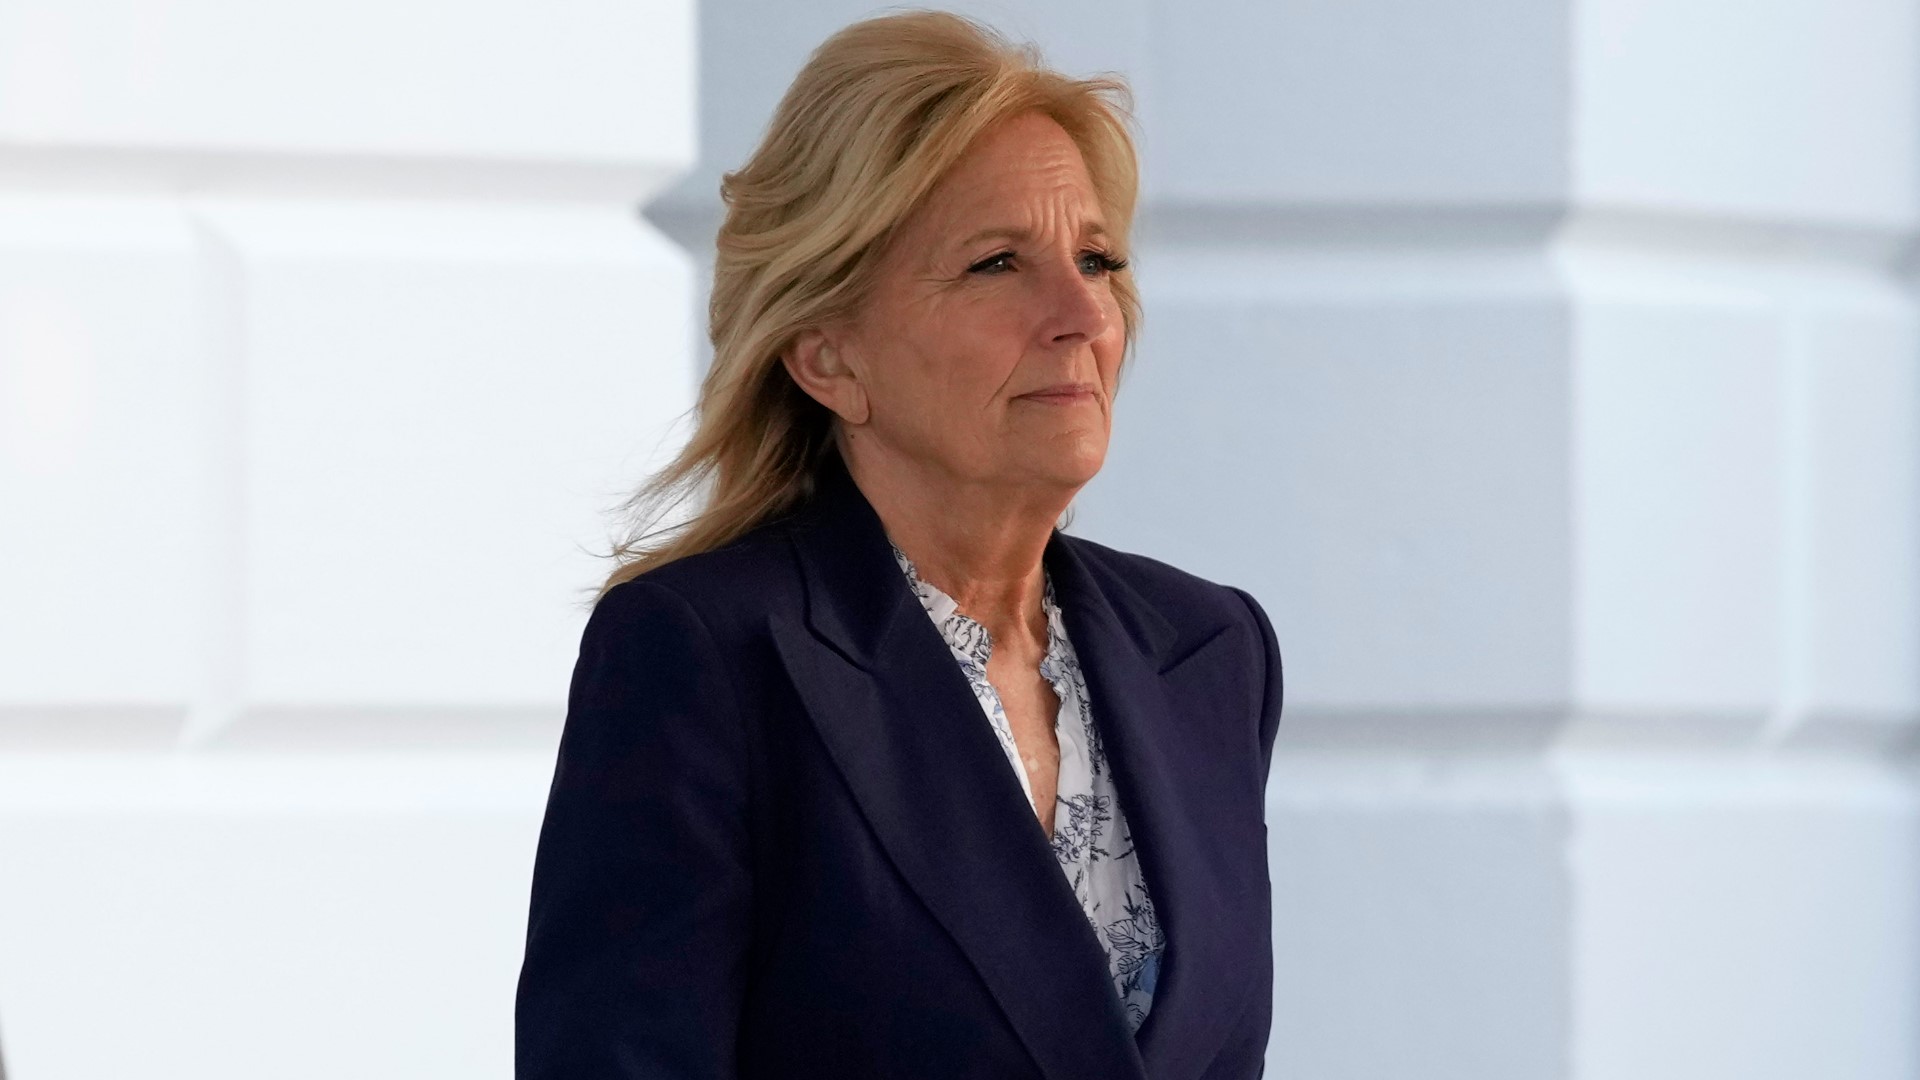 The president's doctor says exams showed a lesion over Jill Biden’s left eye and one newly discovered on her chest were both confirmed to be basal cell carcinoma.